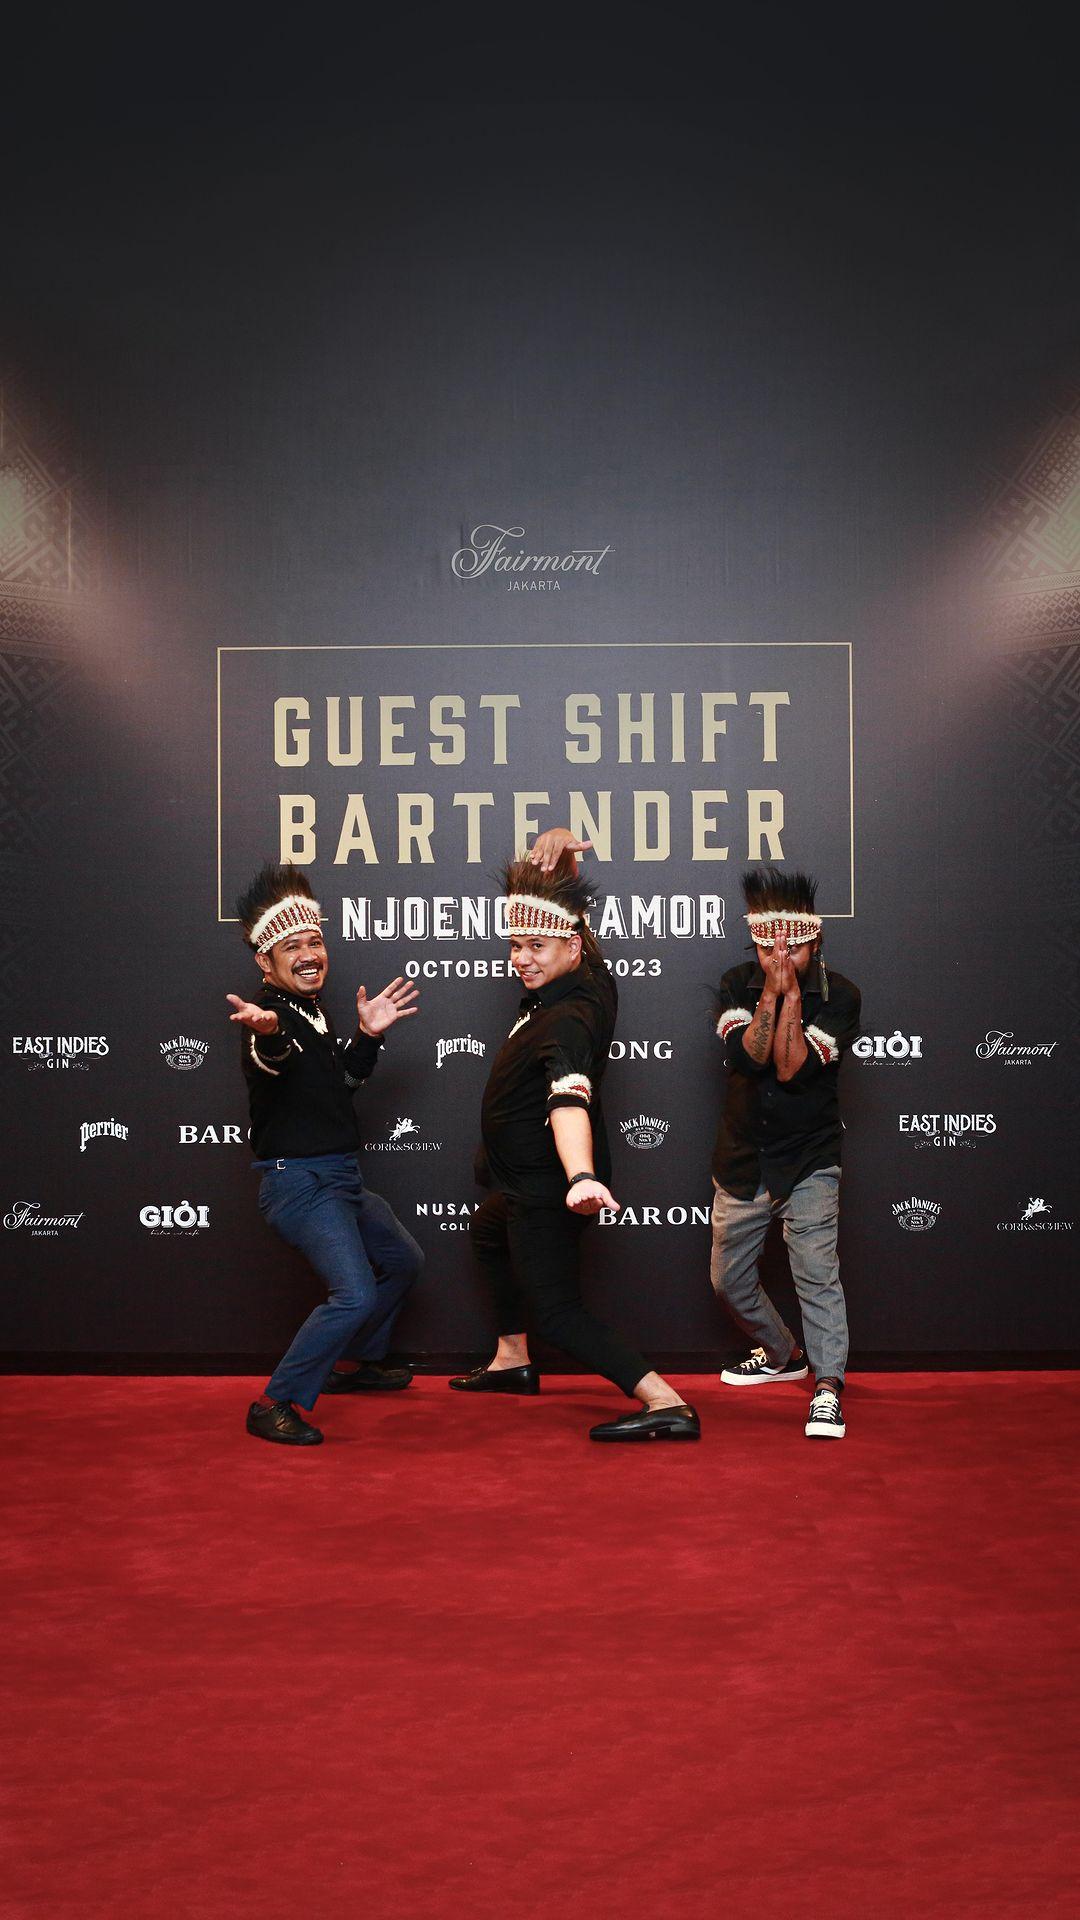 class="content__text"Throwing it back to last week’s Guest Shift Bartender Vol 04, 𝐍𝐣𝐨𝐞𝐧𝐠 𝐓𝐞𝐚𝐦𝐨𝐫 featuring the incredible talents @andrew_ale2505 from @barongbarjkt , @cocktail_warrior from @corknscrew, and @darrendfretes from @gioijakarta 🍹🎉 

We couldn’t have done it without our amazing sponsors @eastindiesgin @nusantaracoldbrew @perrierindonesia @jackdaniels_ea
Cheers to the good times and great drinks!

#FairmontJakarta #BARONGbar #GuestShiftBartenderSeries